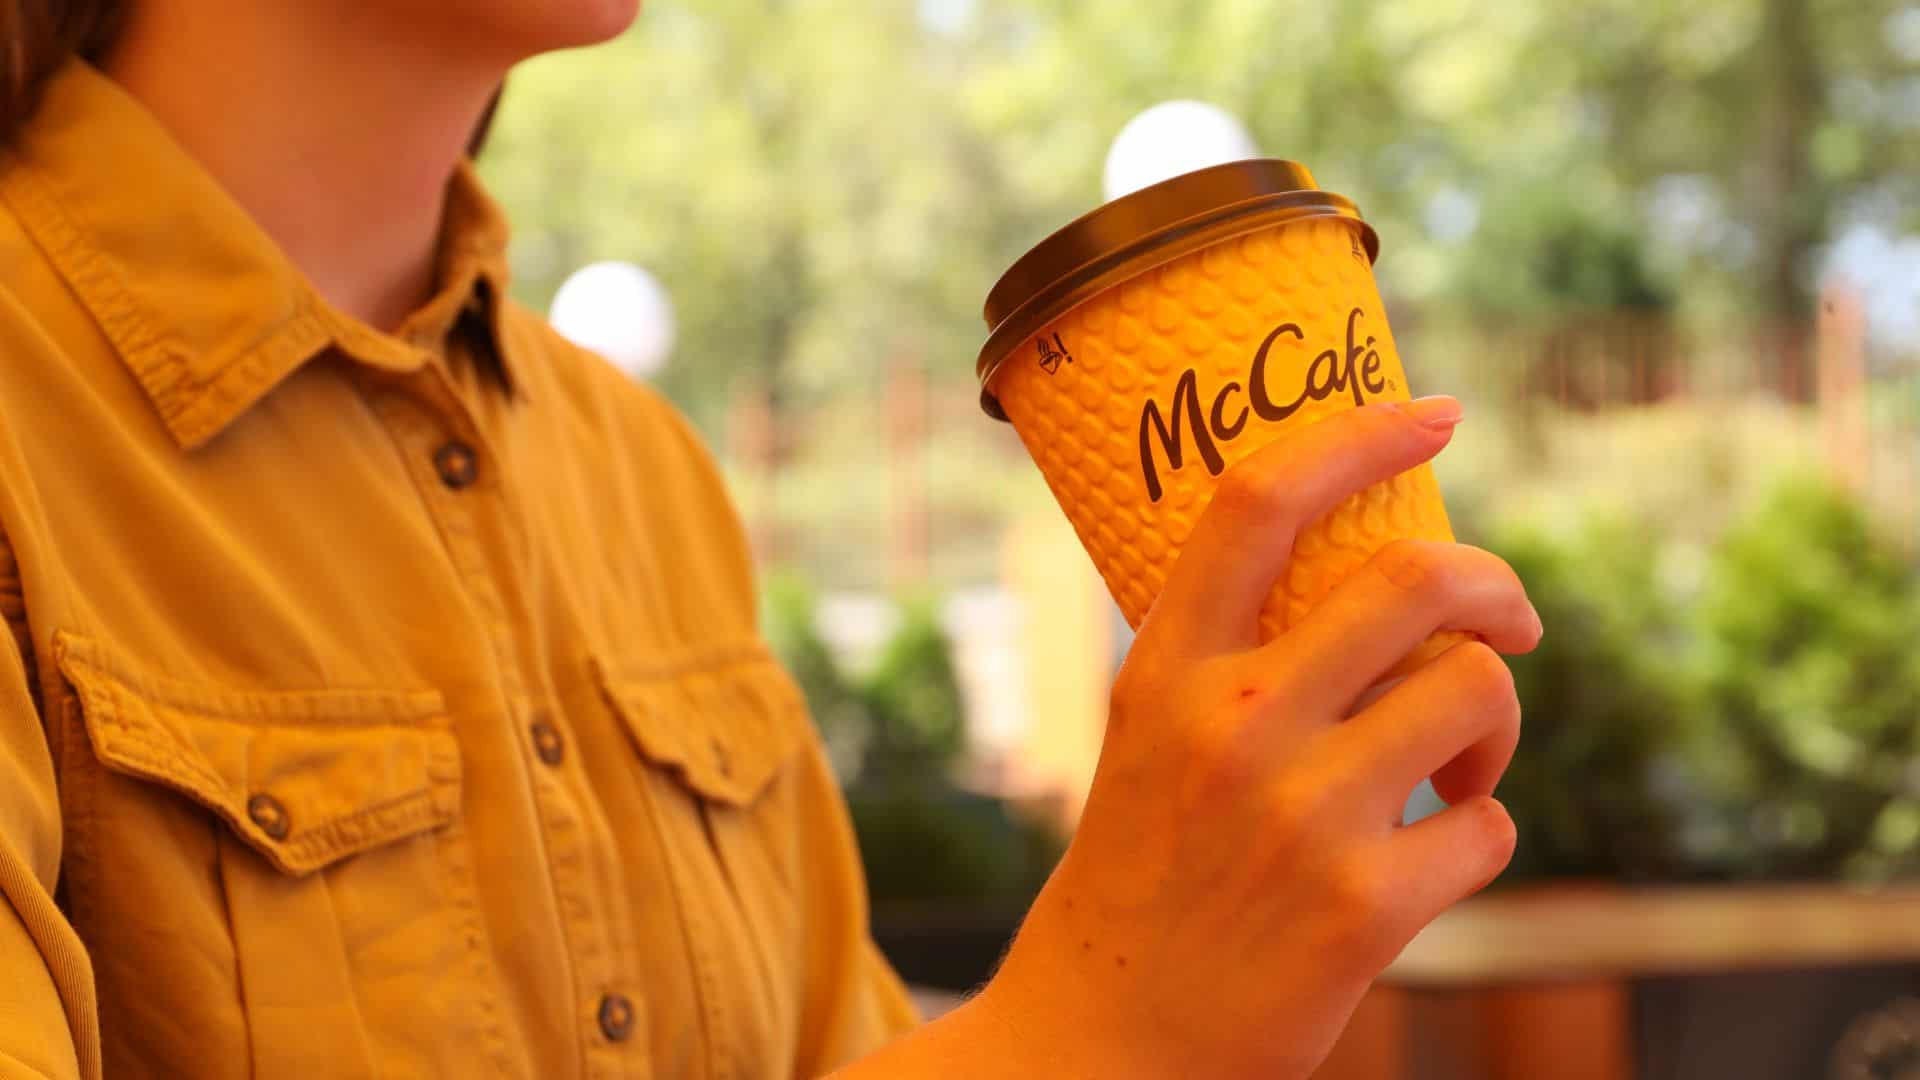 <p>Keeping its promise about being sustainable, McDonald’s takes it up a notch by sourcing its coffee from sustainable farms.</p><p>Most of these farms are certified, so at least you know your coffee won’t have a bad grain in it. These farms also promote the responsible production, preventing food wastage and general bad behaviors.</p><p>McDonald’s is fully committed, though, because the McCafe has its own Sustainability Improvement Platform. Cool!</p>